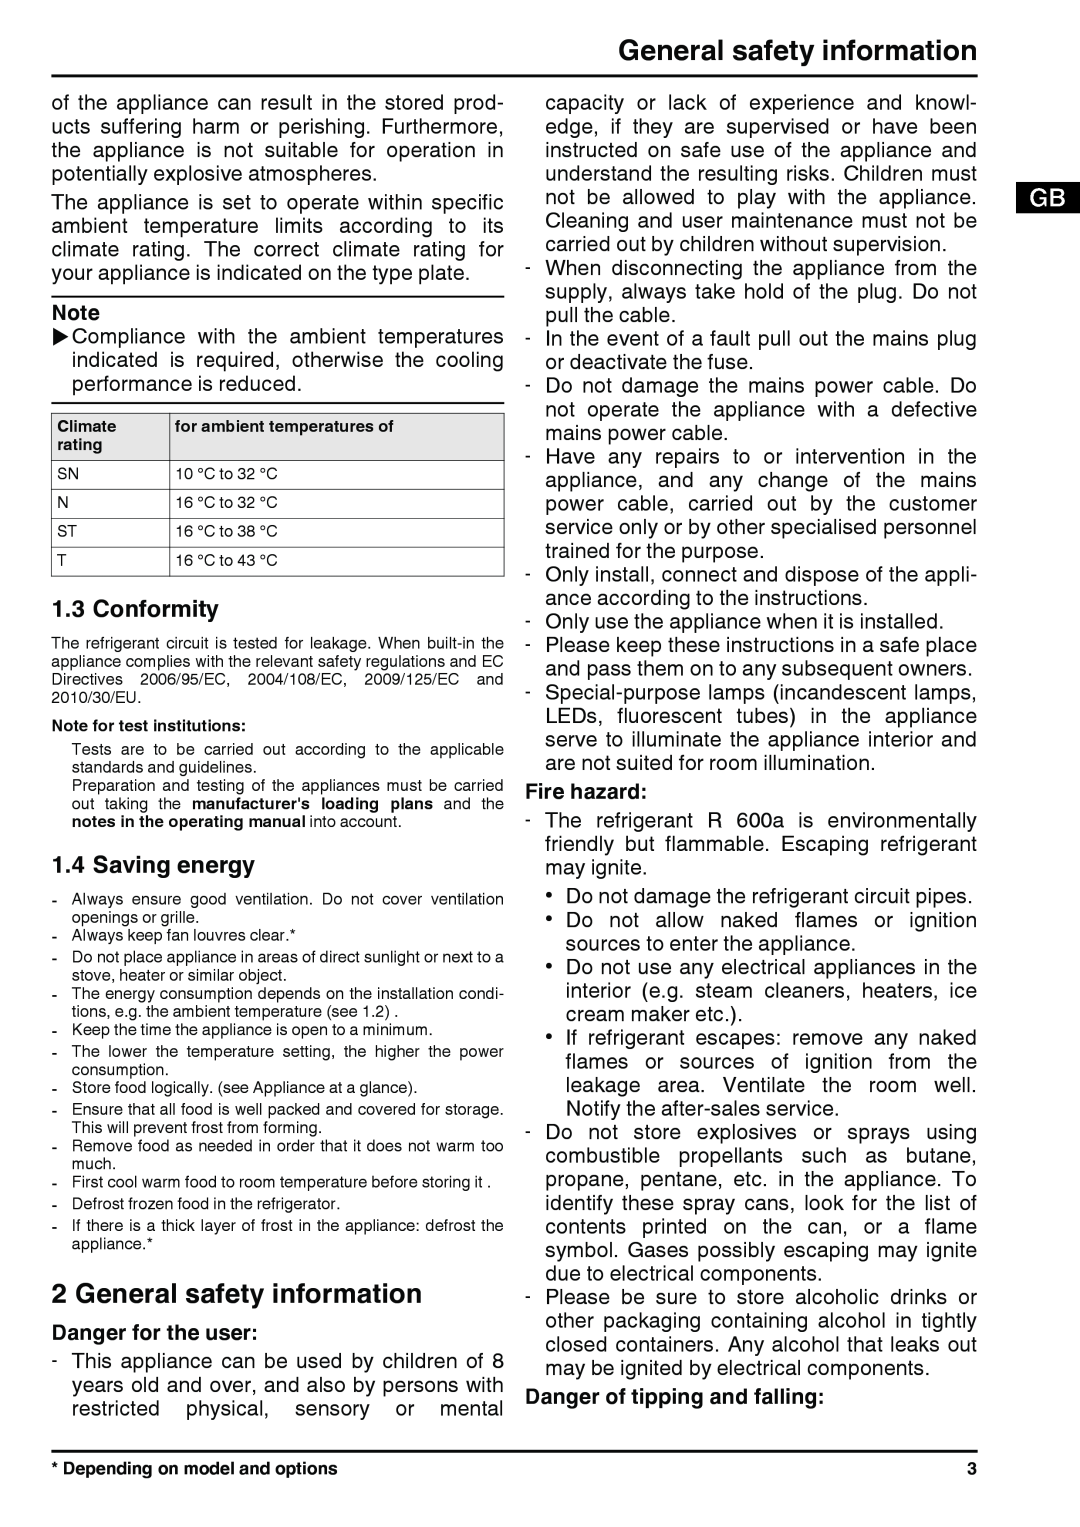 Liebherr 7085446-01 manual General safety information, Conformity, Saving energy, Danger for the user, Fire hazard 